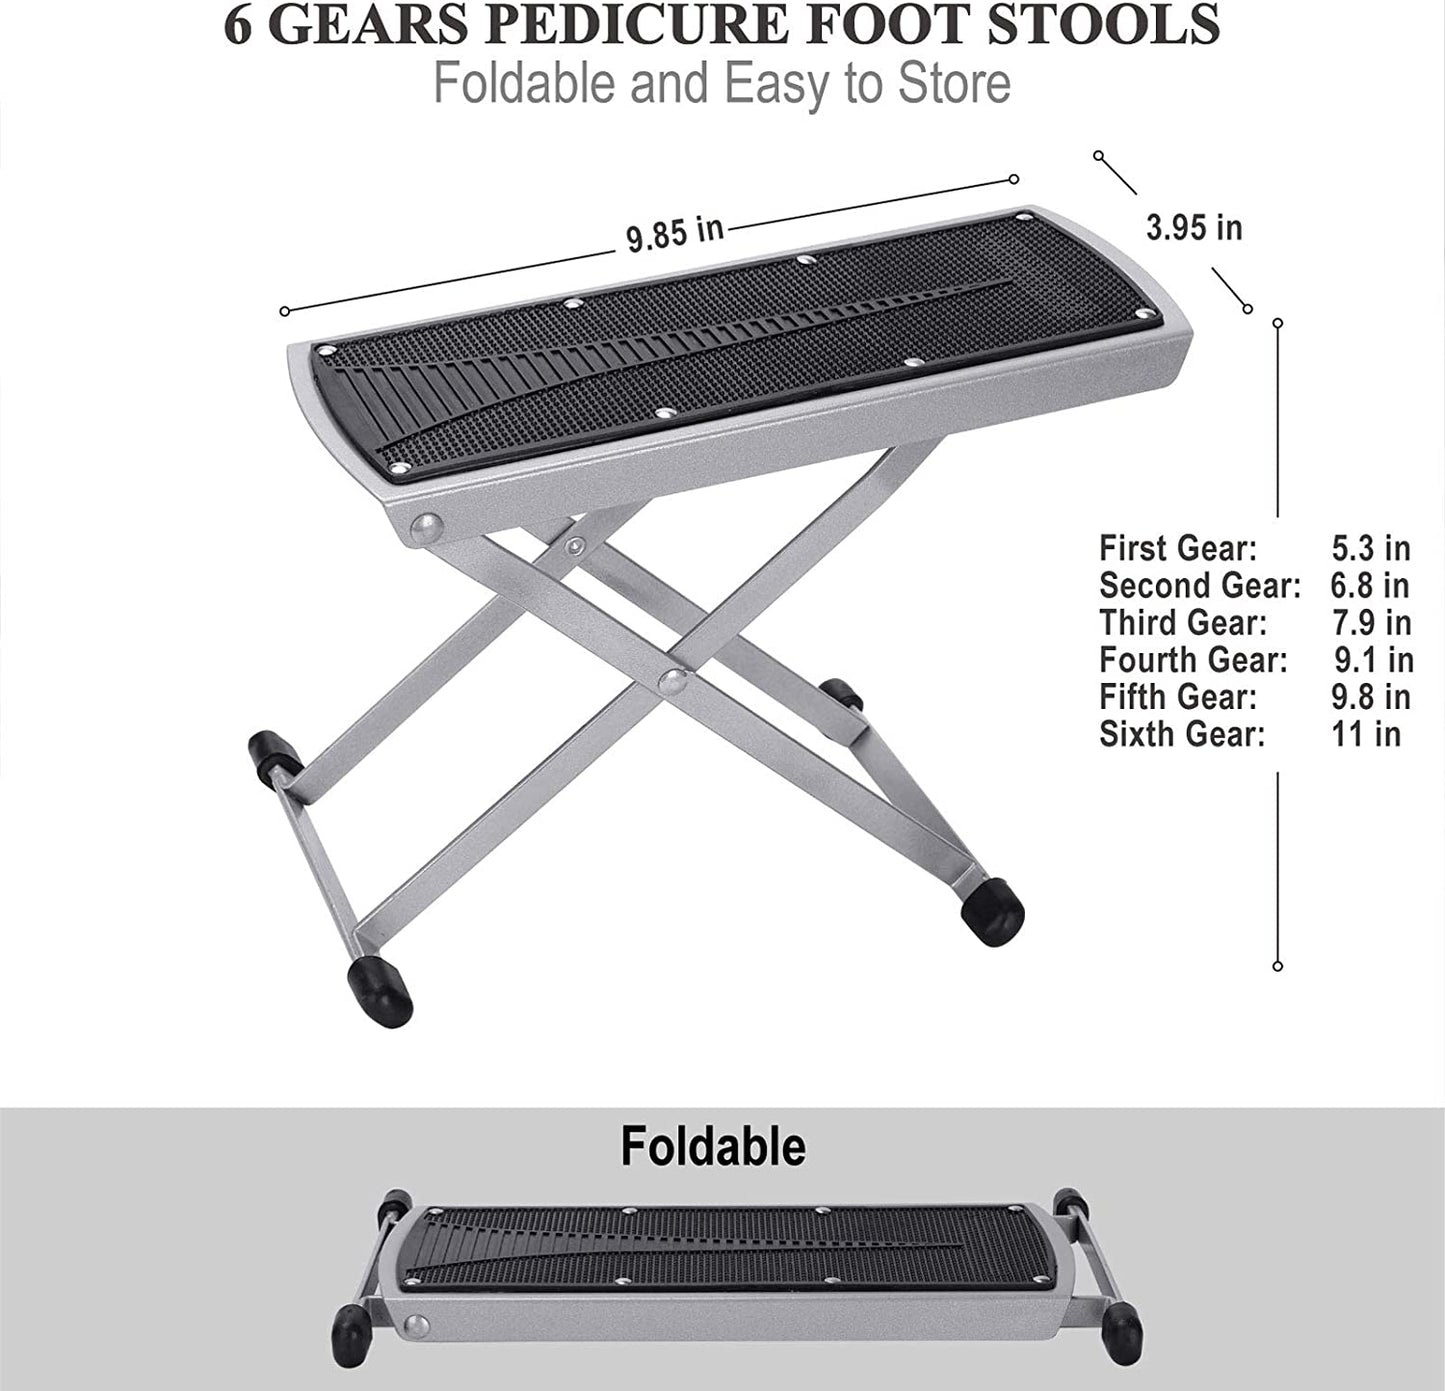 Pedicure Foot Rest, Adjustable Foot Rest for Easy at Home Pedicures, No More Bending or Stretching Pedicure Tools, Non-Slip Sturdy Legs with Toe Separator, Beauty Pedicure Kit (Black)